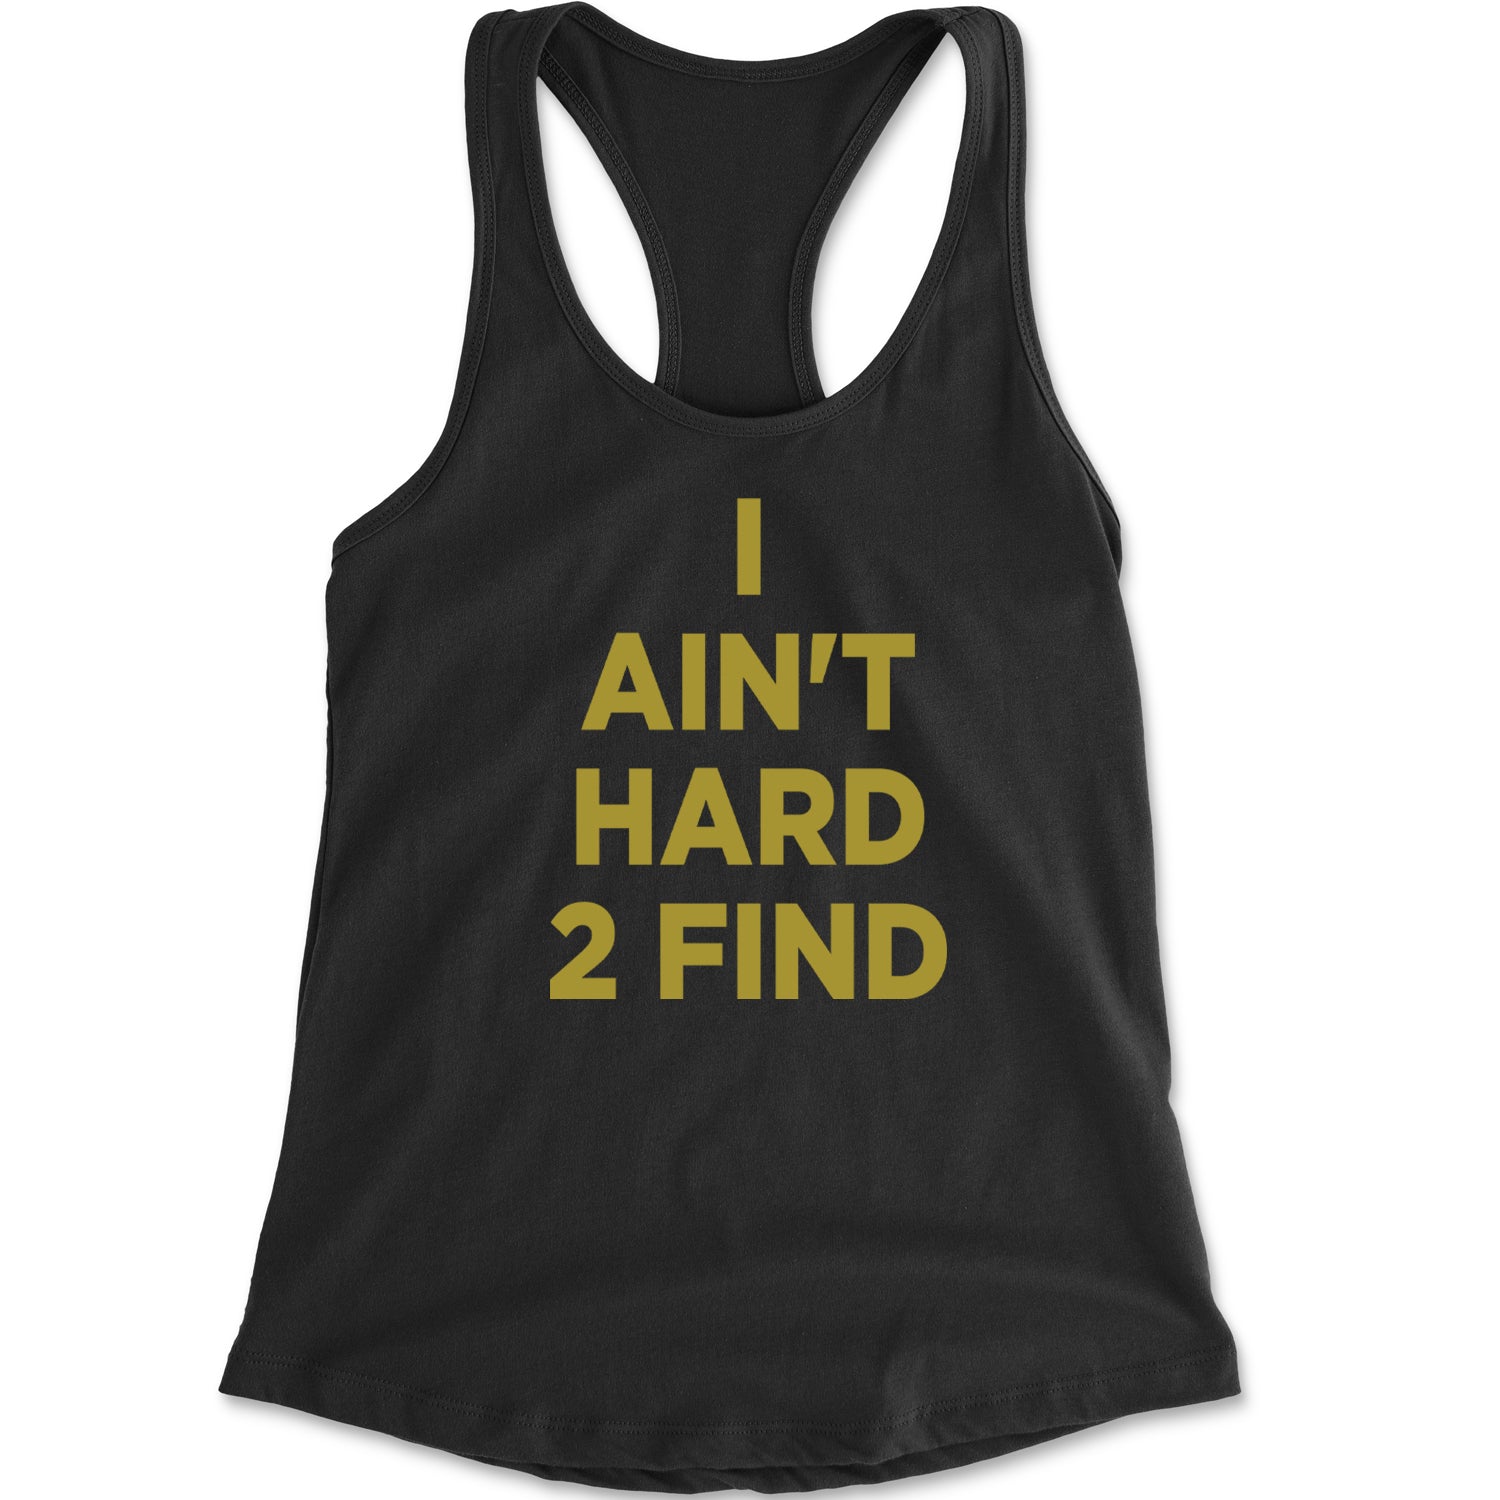 I Ain't Hard To Find Coach Prime Racerback Tank Top for Women